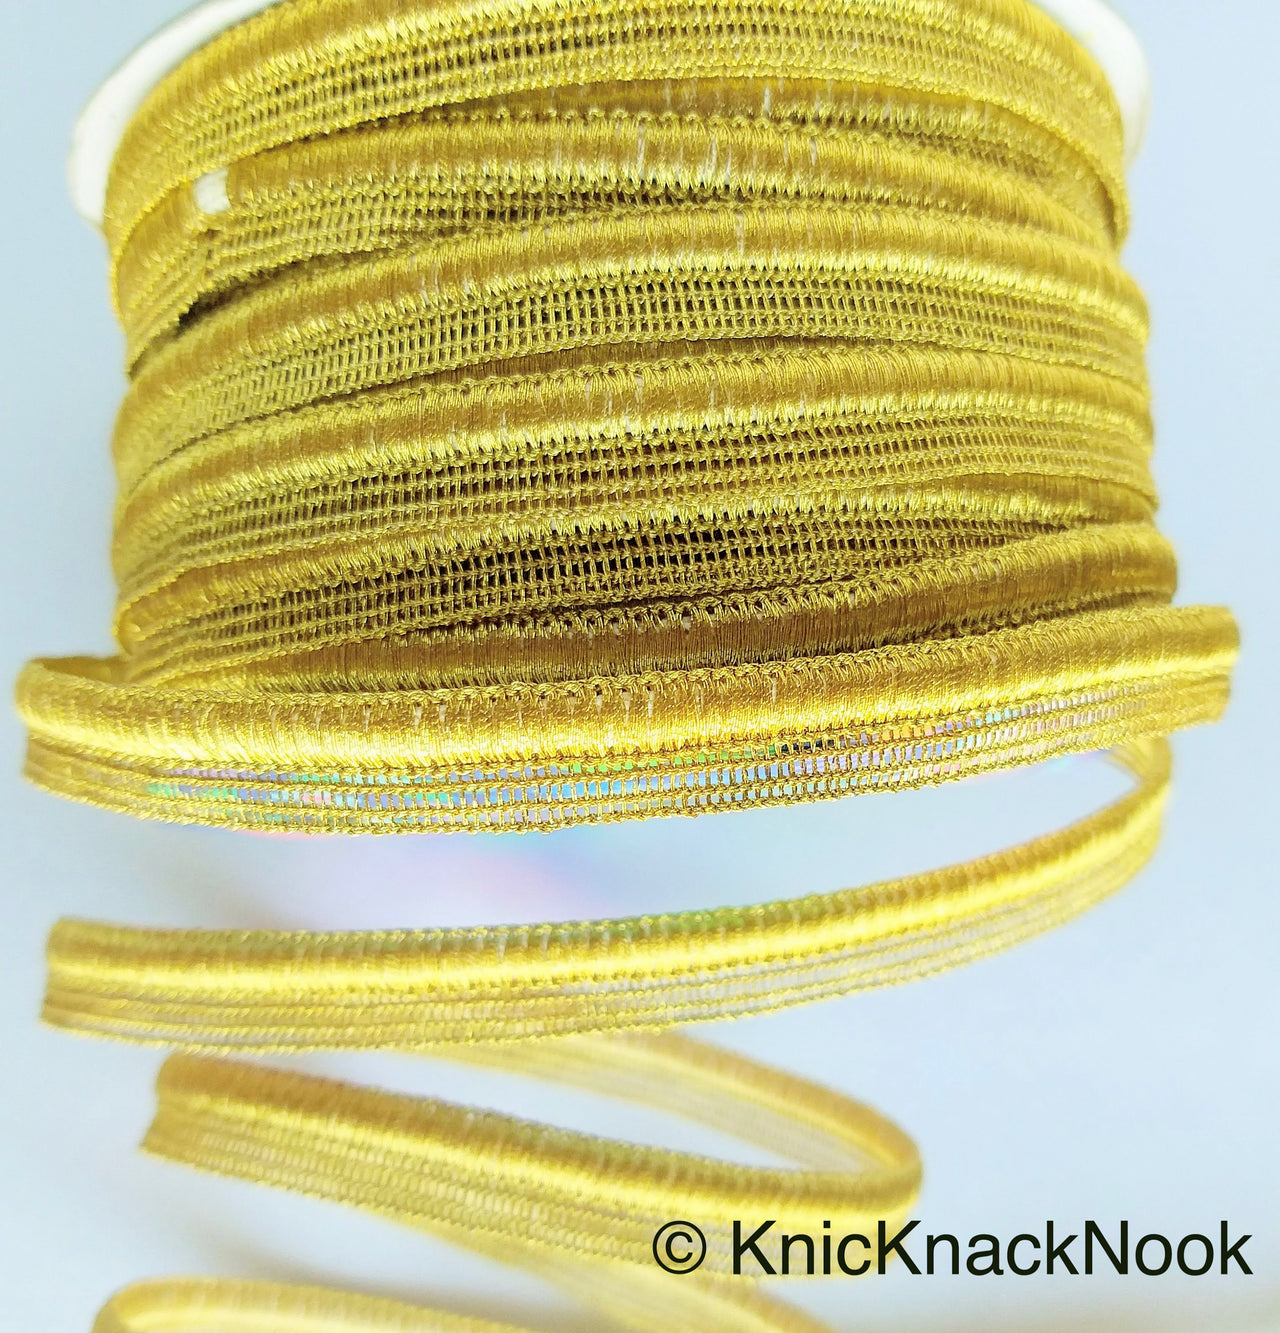 Antique Gold / Light Gold / Silver Lace Trim With Glitter Piping, Fringe Trim, Approx. 10 mm wide - 210119L83/84/85Trim